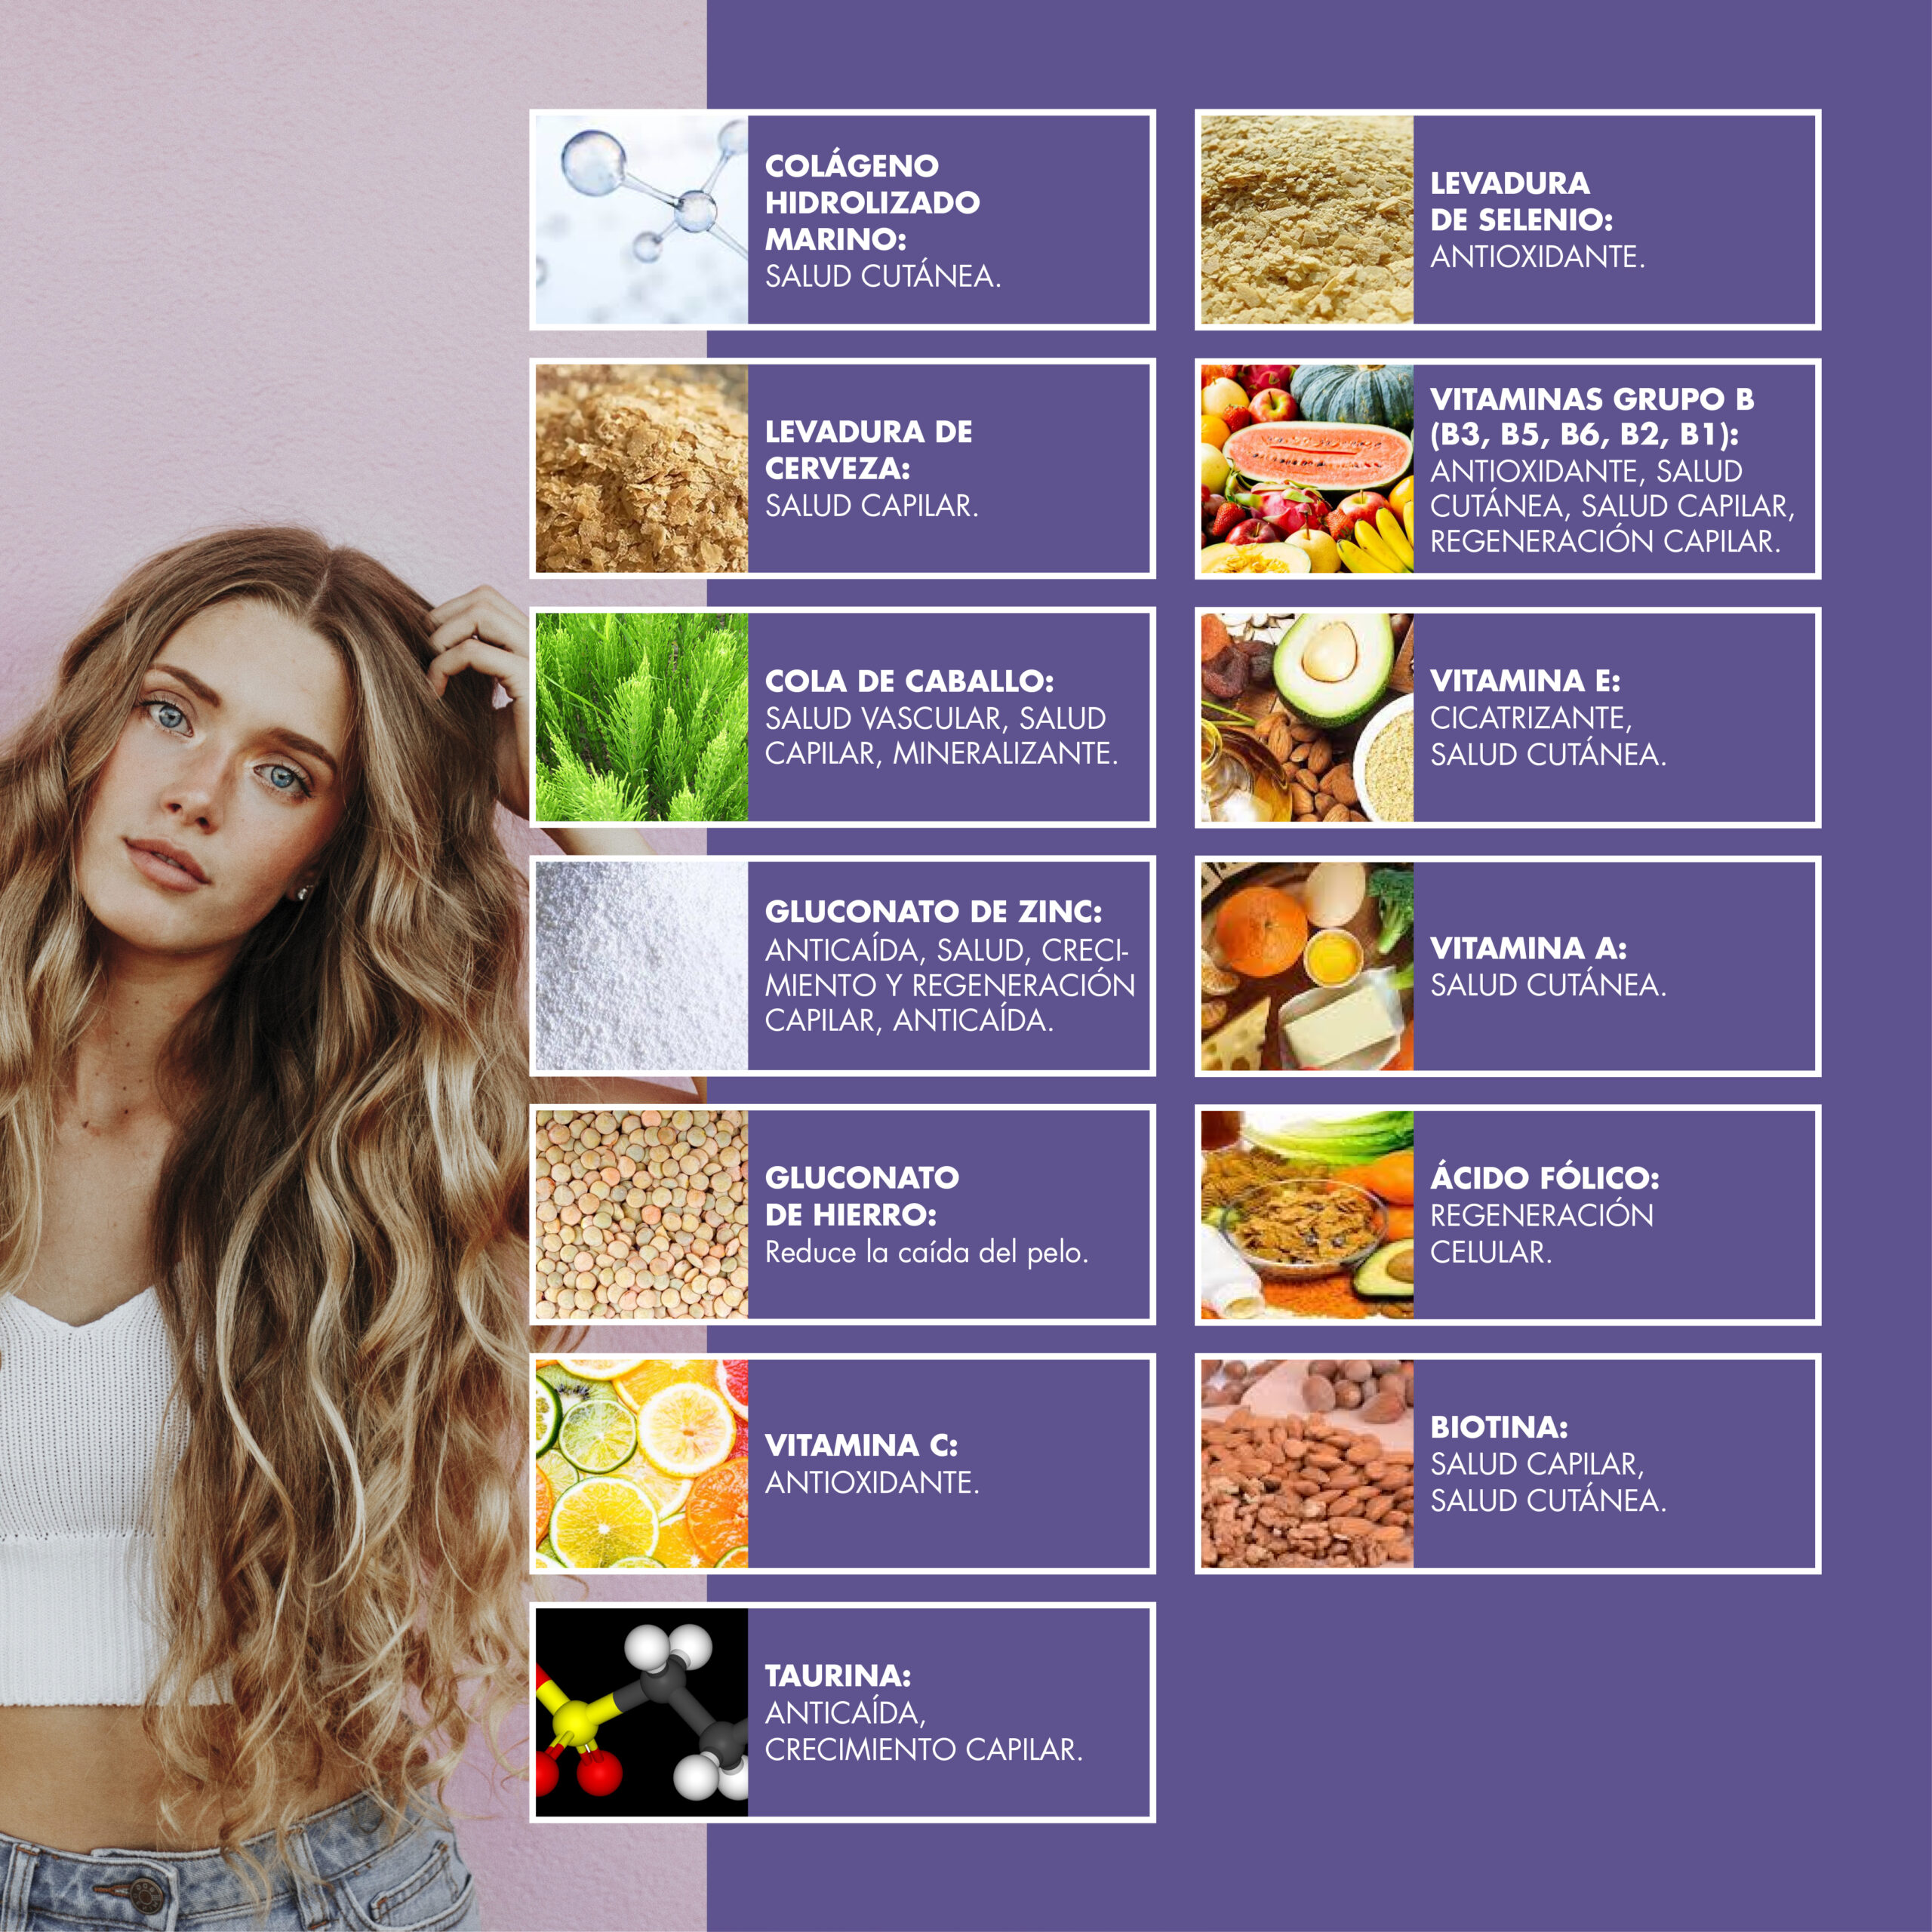 HAIR, SKIN AND NAIL CARE CAPSULES BEST DIET